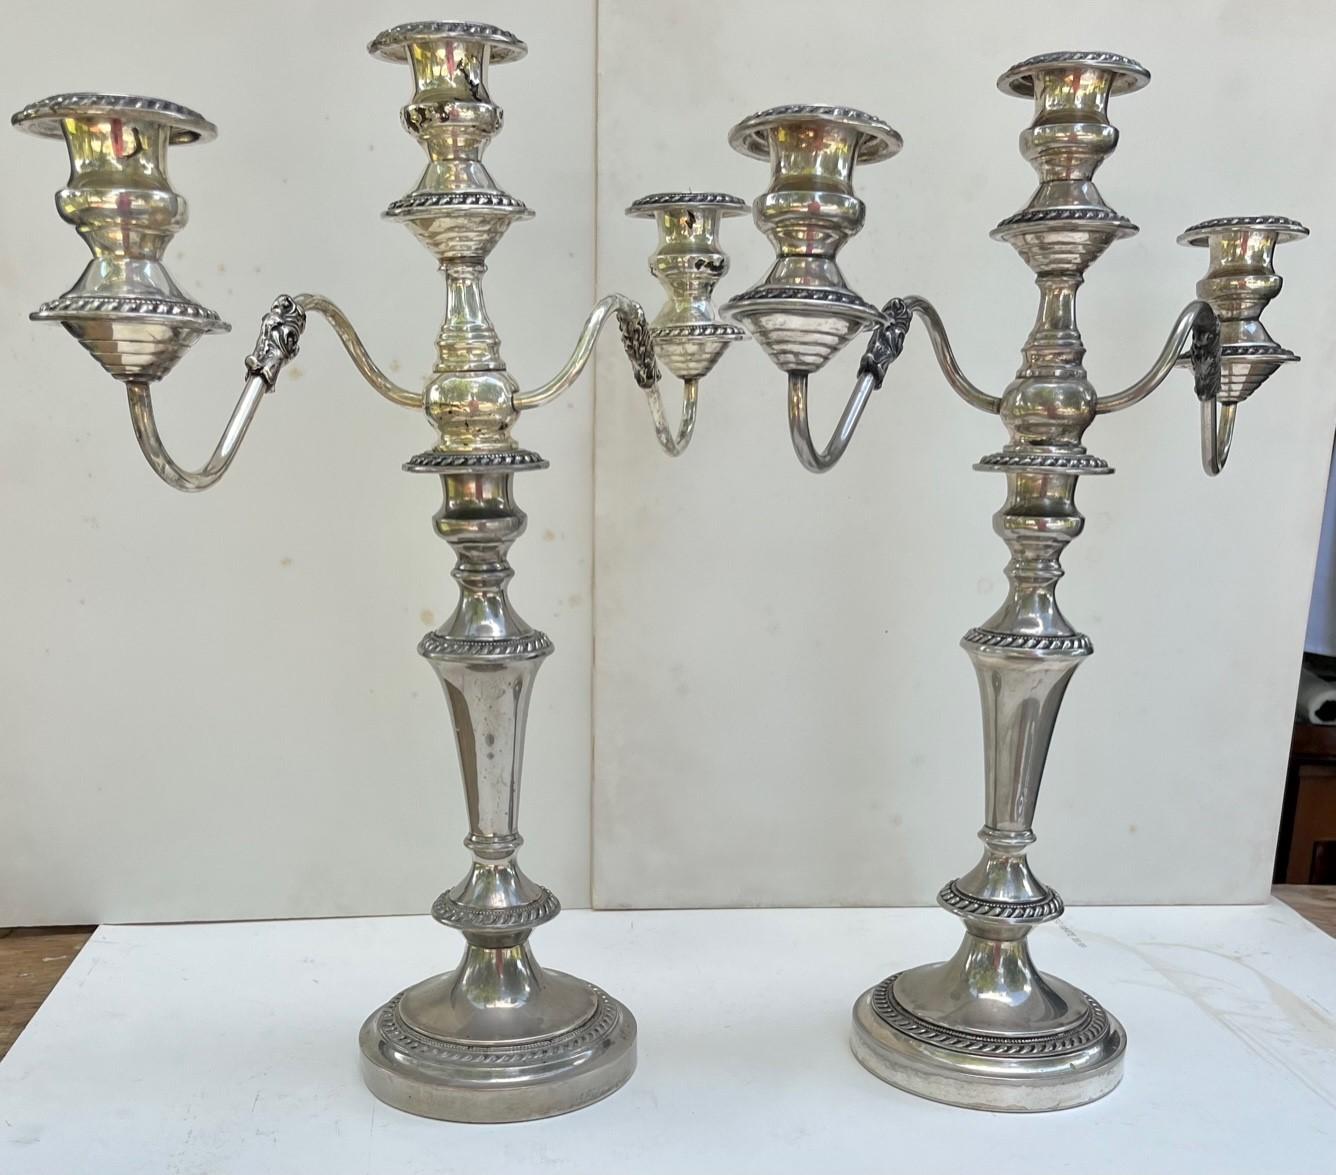 Pair George III Old Sheffield Silver Plated Three Light Candelabras.

Elegant pair of 19th century Georgian Sheffield Silver Plate three light Candelabra with twin scroll arms. Each has three sconces and detachable nozzles. The arms can be removed